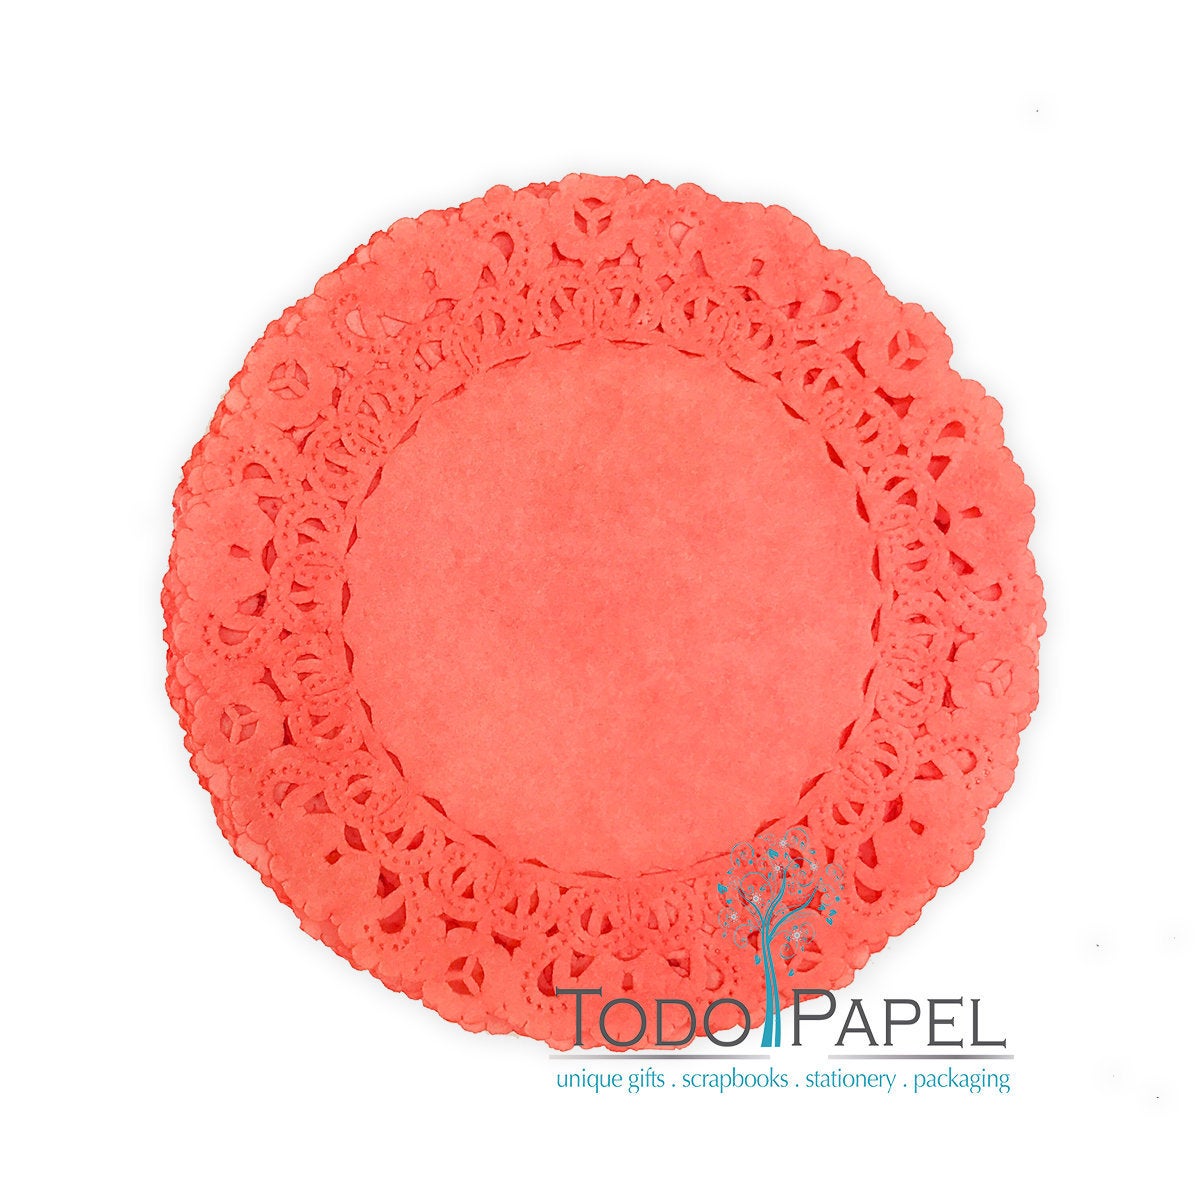 50 Pack 12 Inch Normandy Style Vibrant Deep Coral Paper Lace Doilies - Great As Table Décor Plate Chargers, Placemats, And Centerpieces For